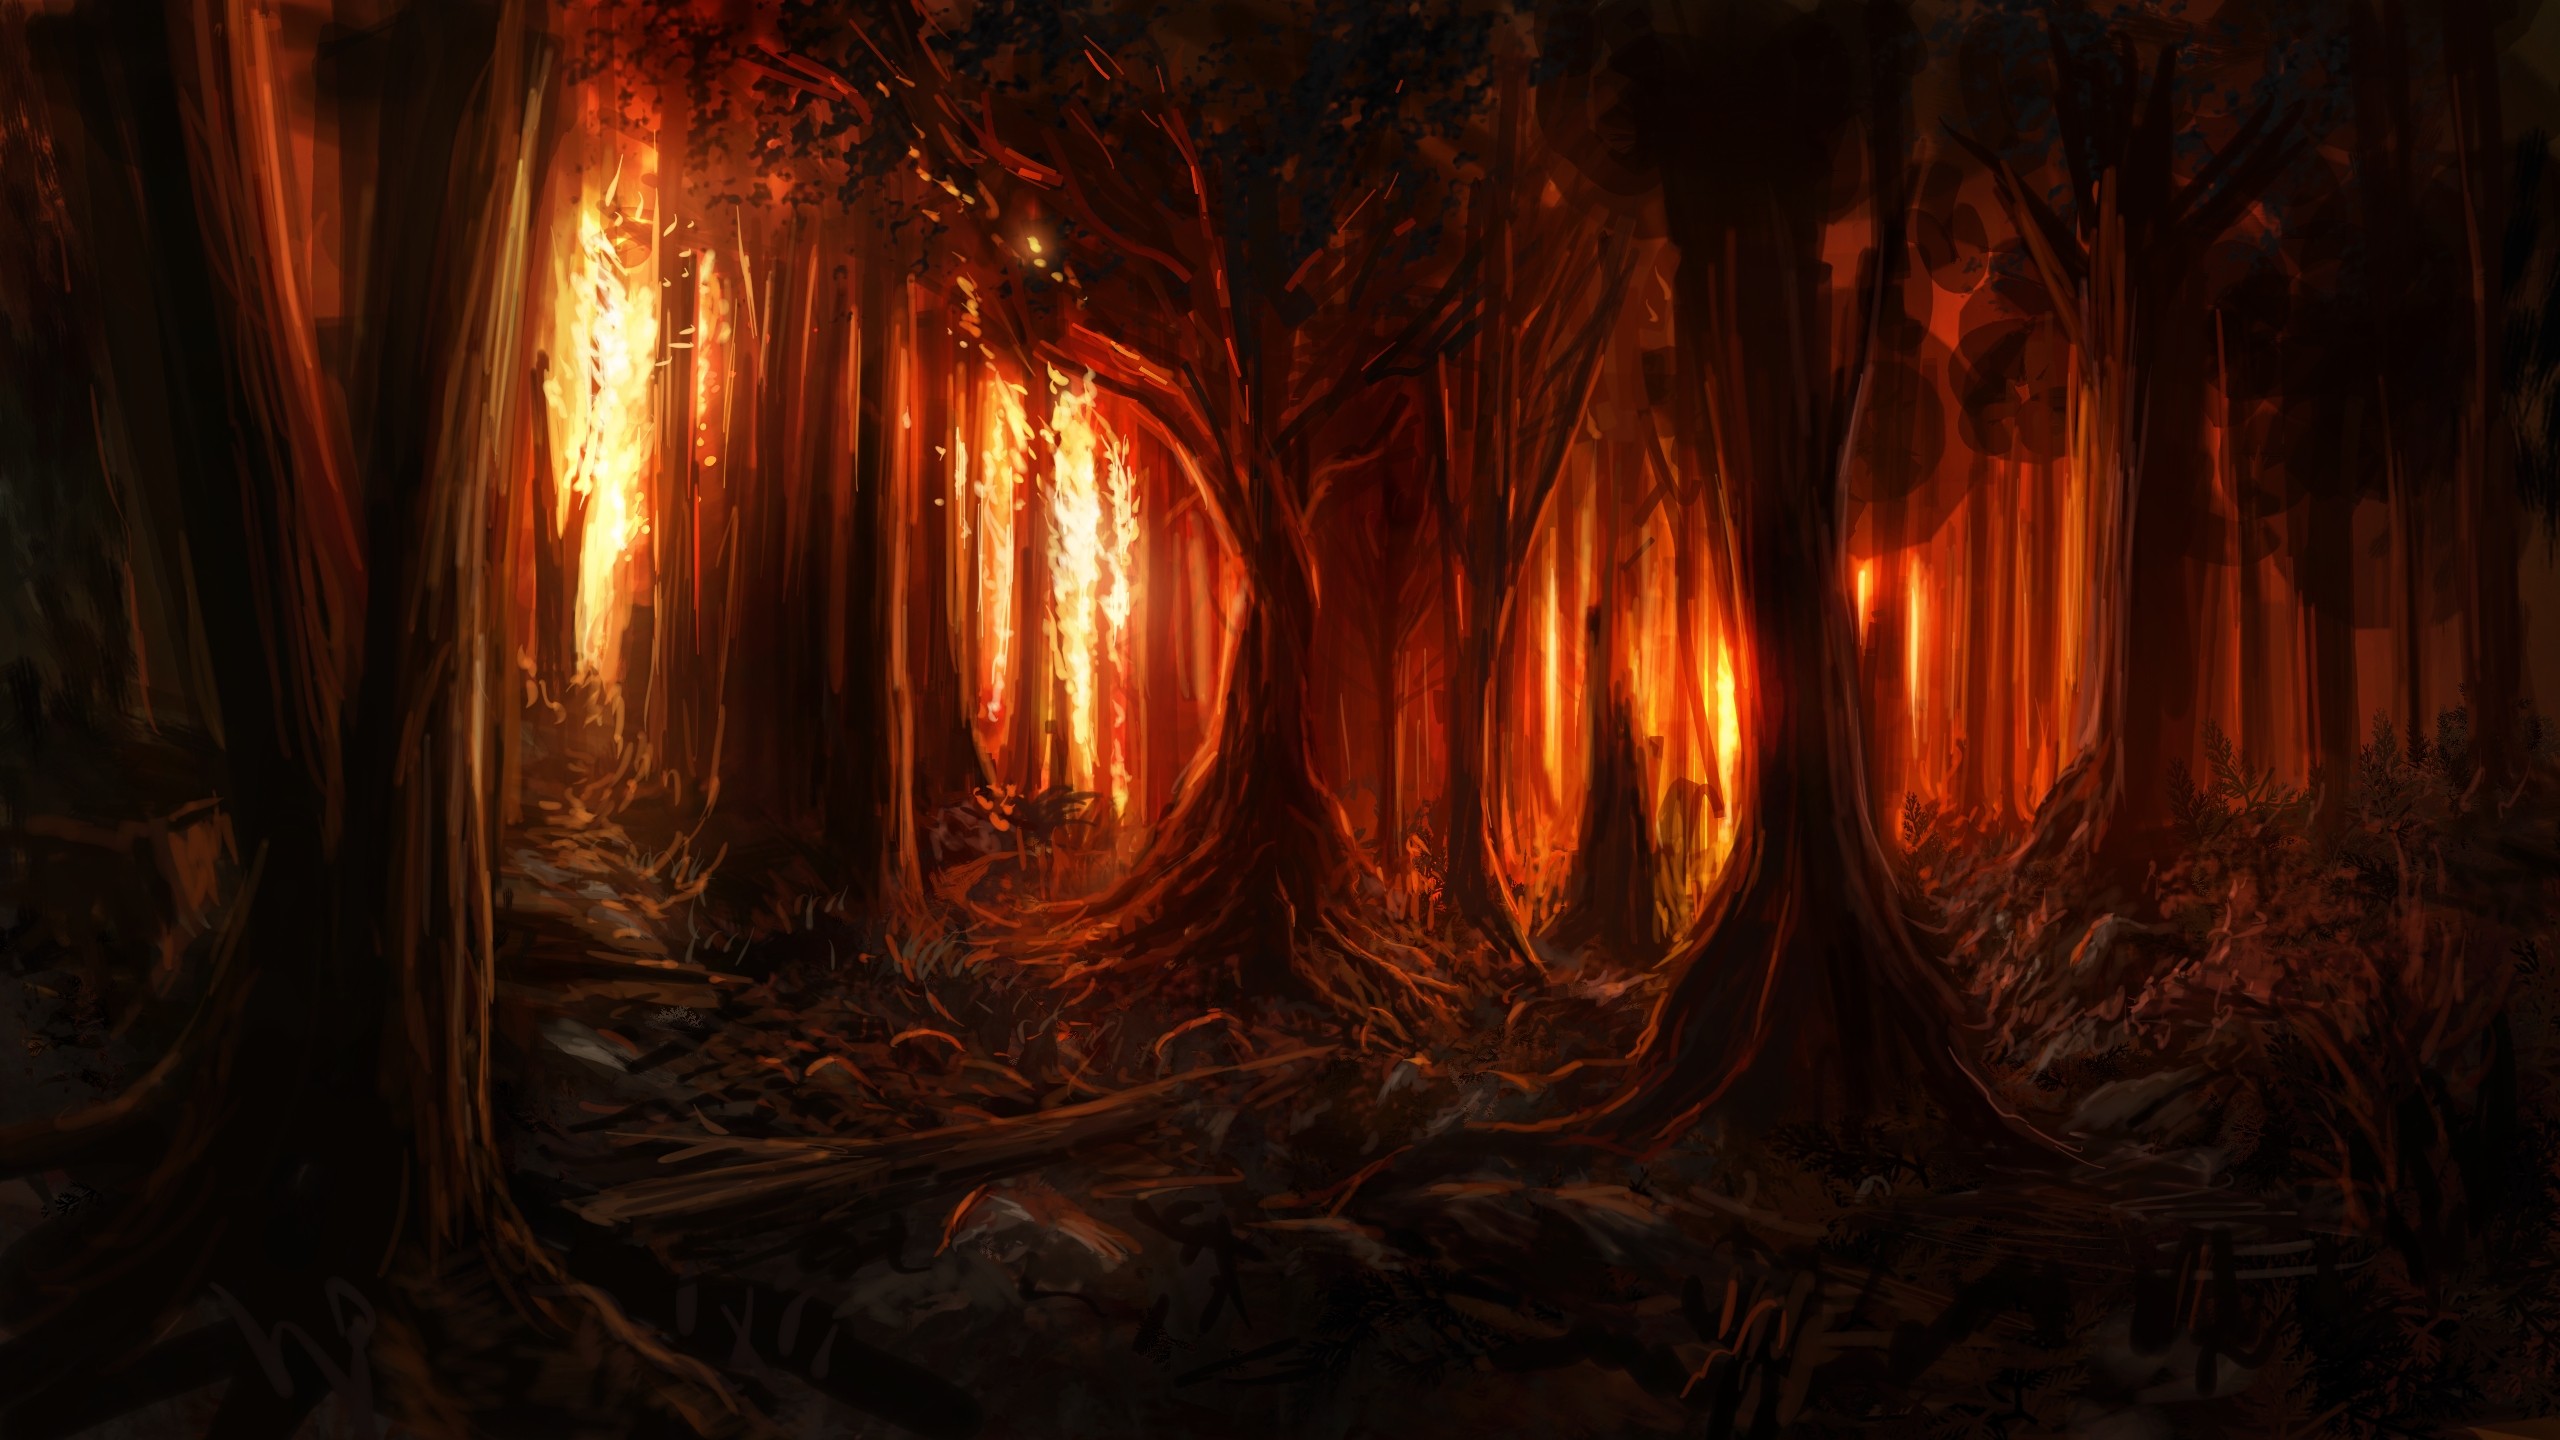 General 2560x1440 digital art nature trees forest painting burning fire wood artwork branch Flame Painter